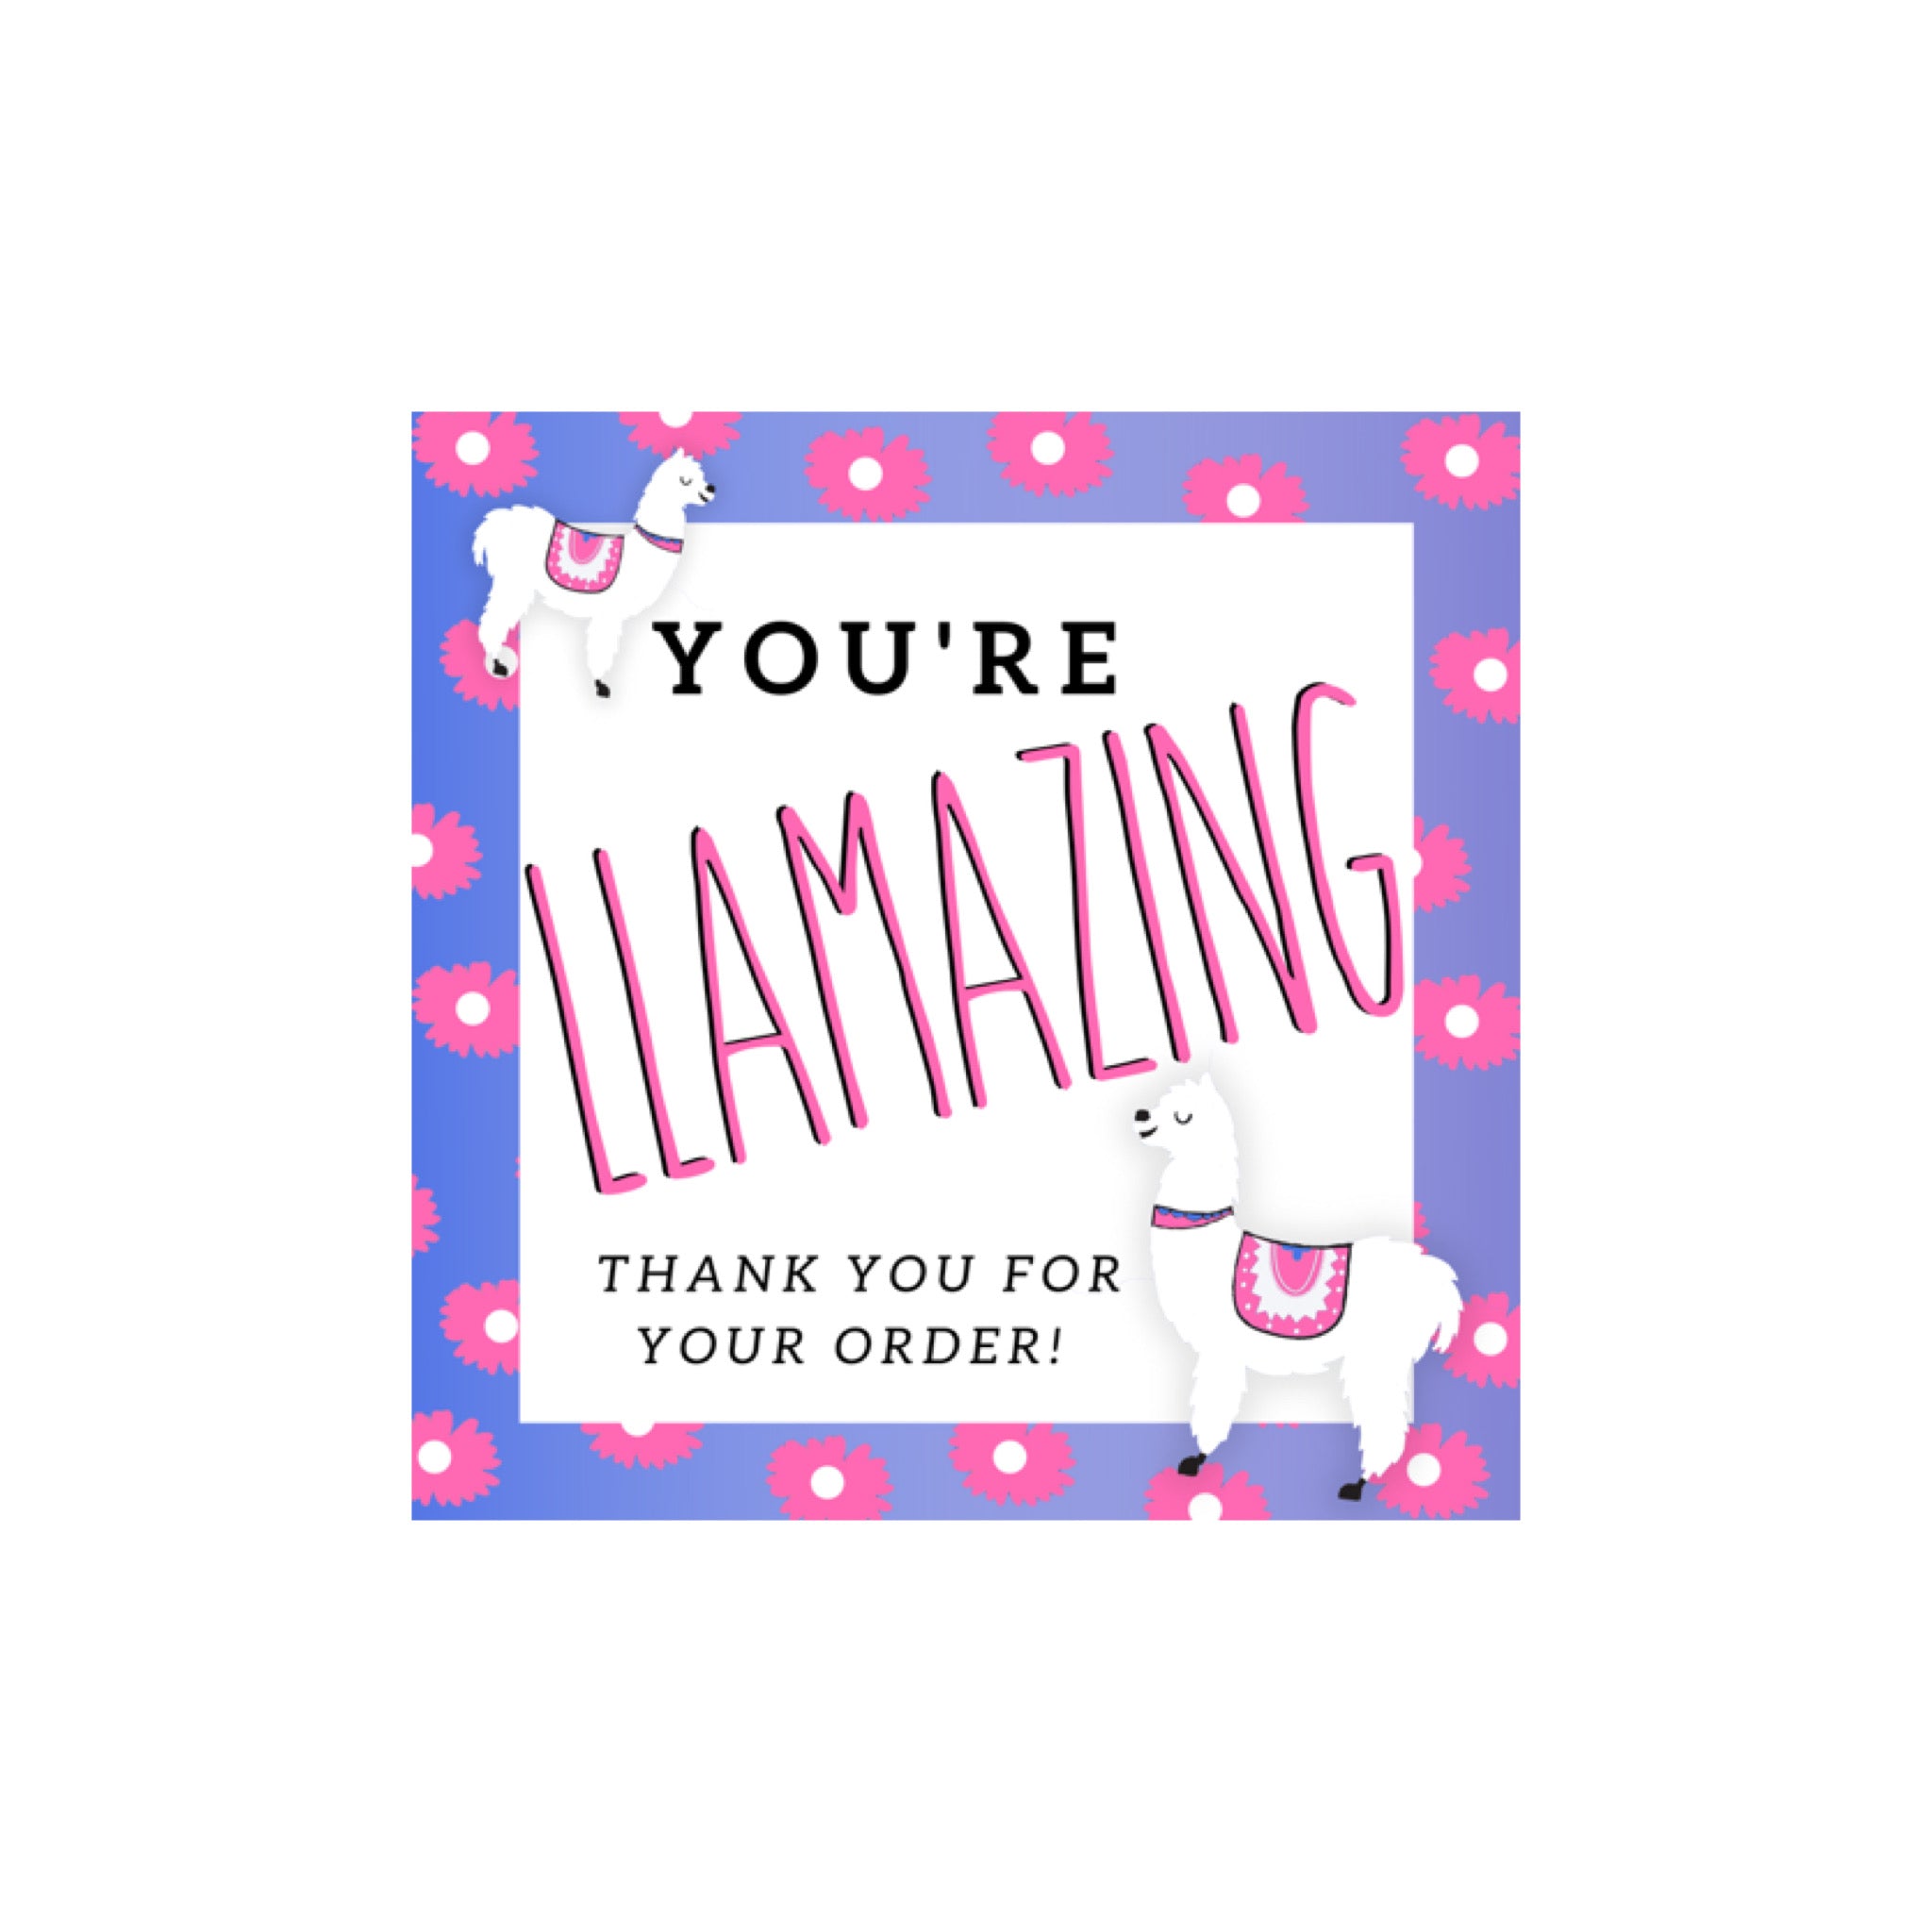 Blue, Purple, & Pink You're Llamazing! 2x2 Square  Thank you for your order Stickers, 25 stickers per pack